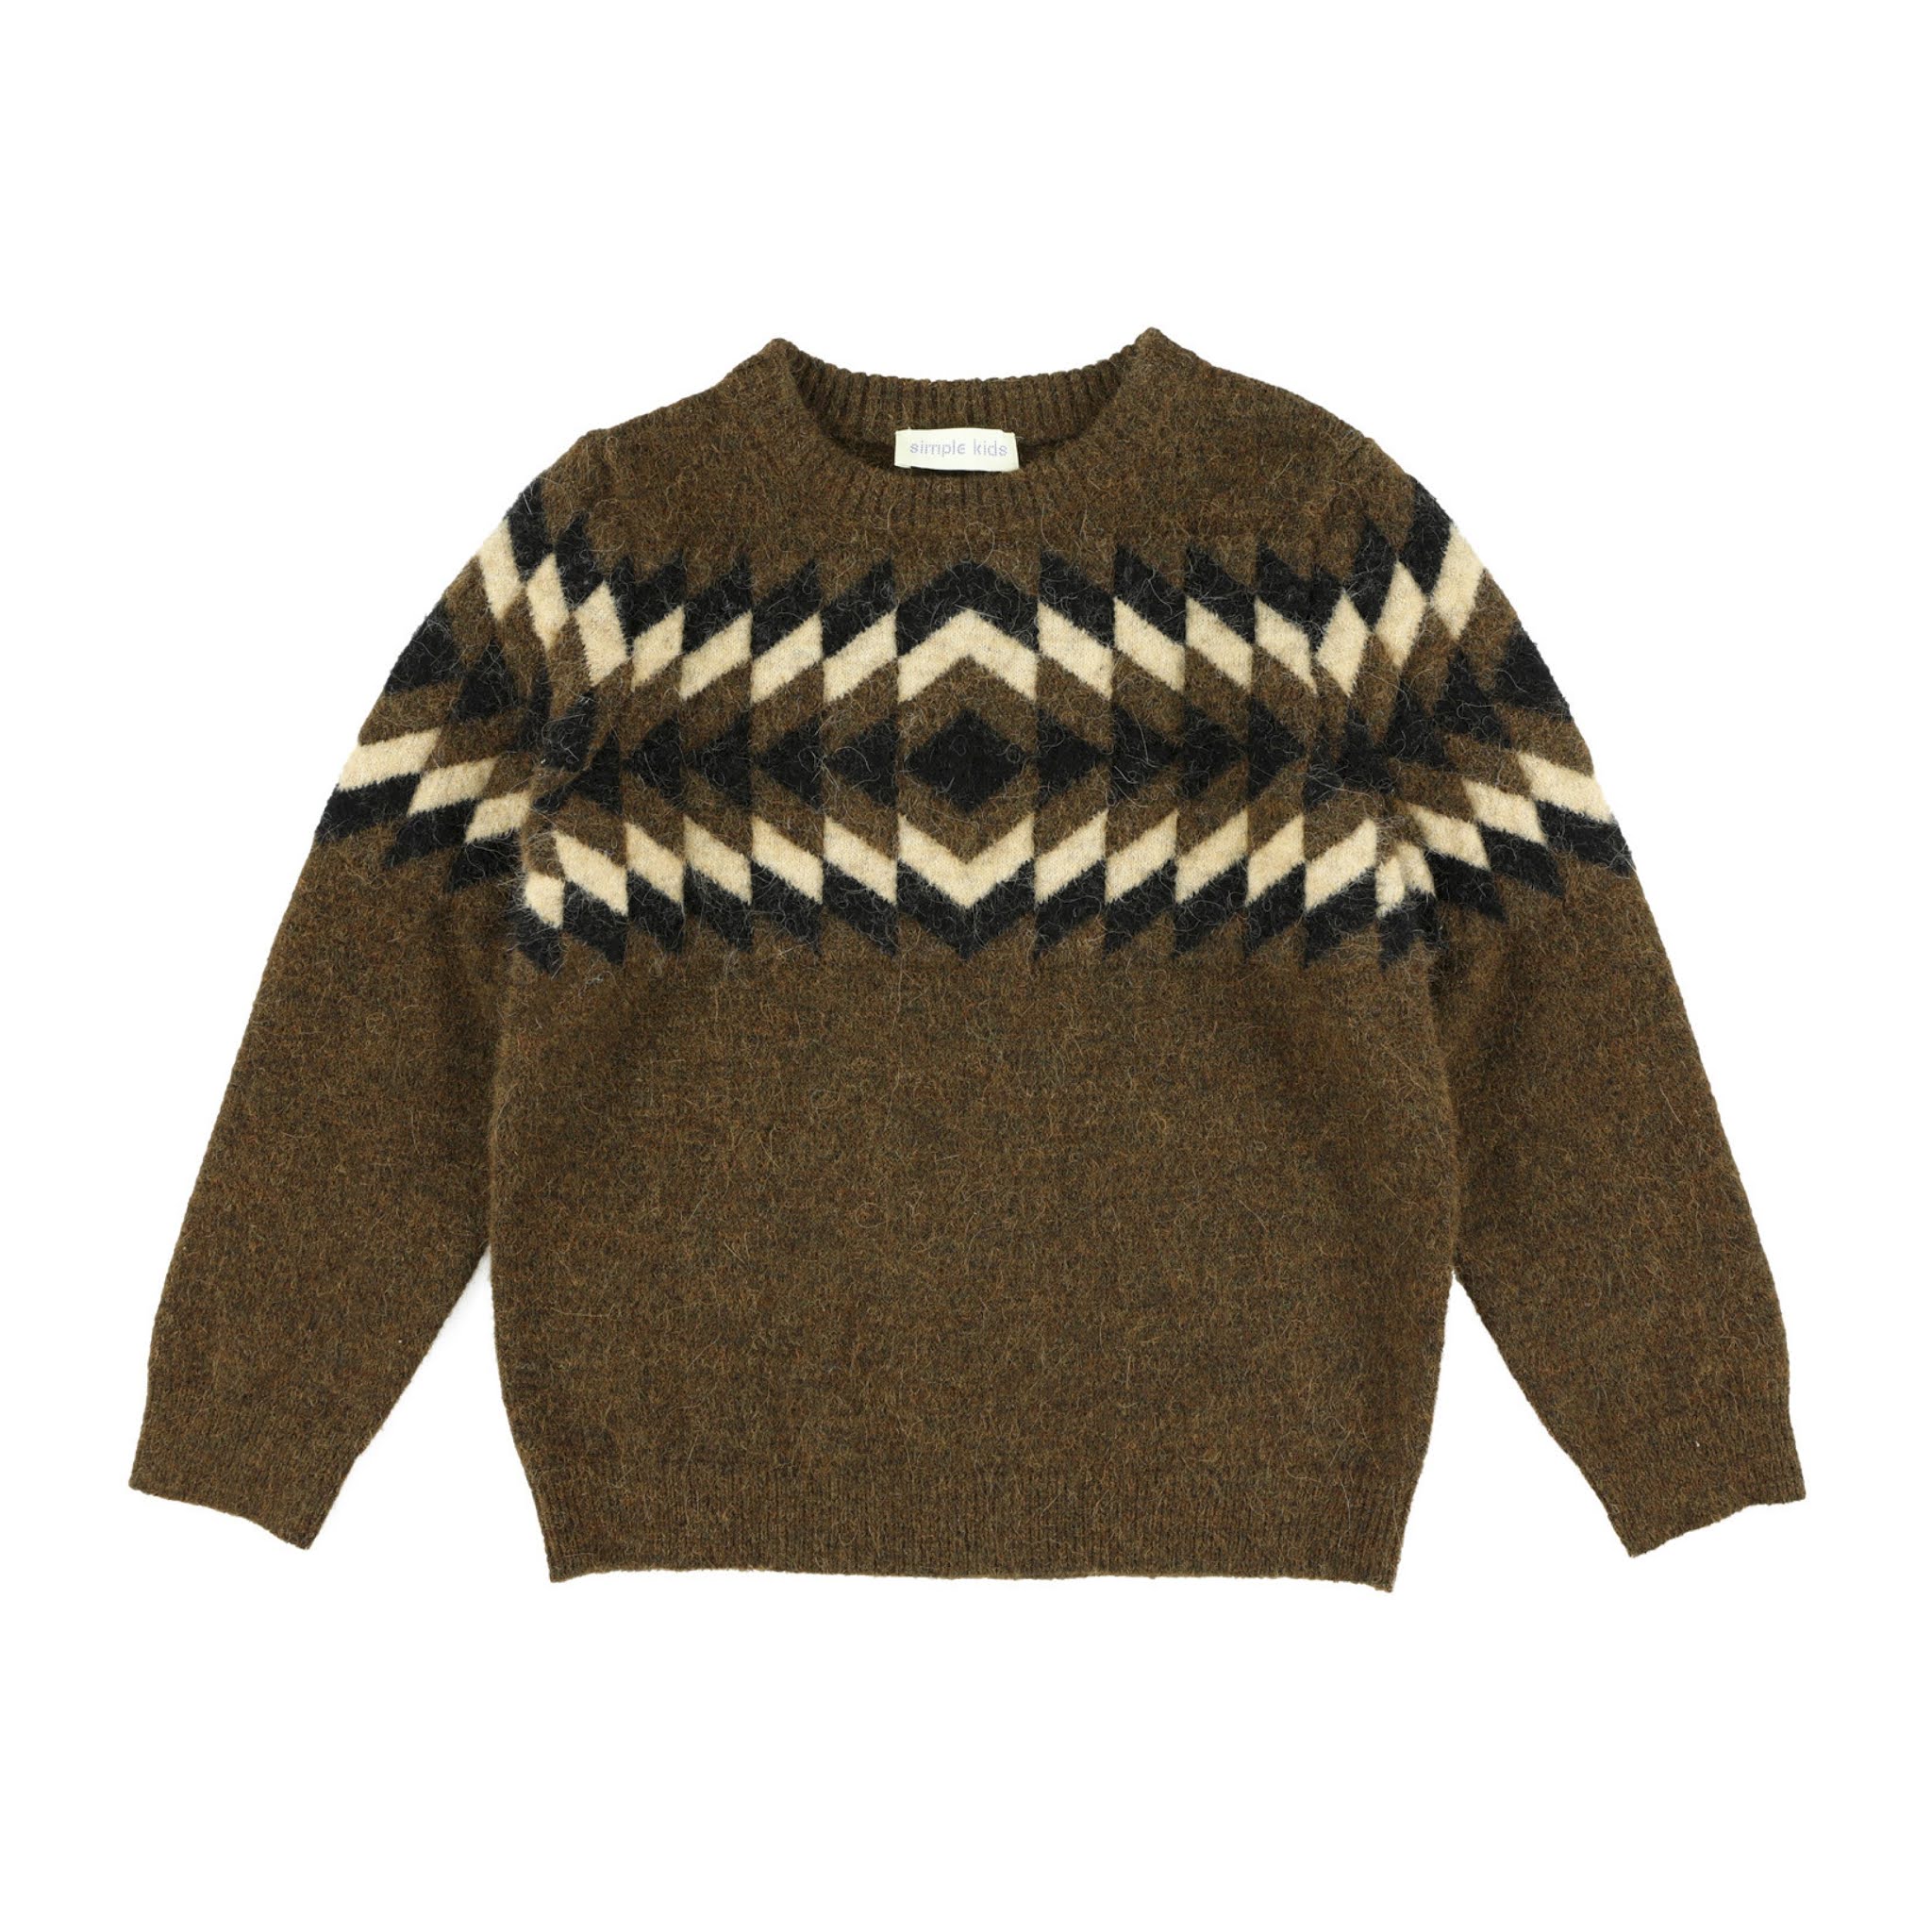 Boys Brown Sweater Jumper from Simple Kids